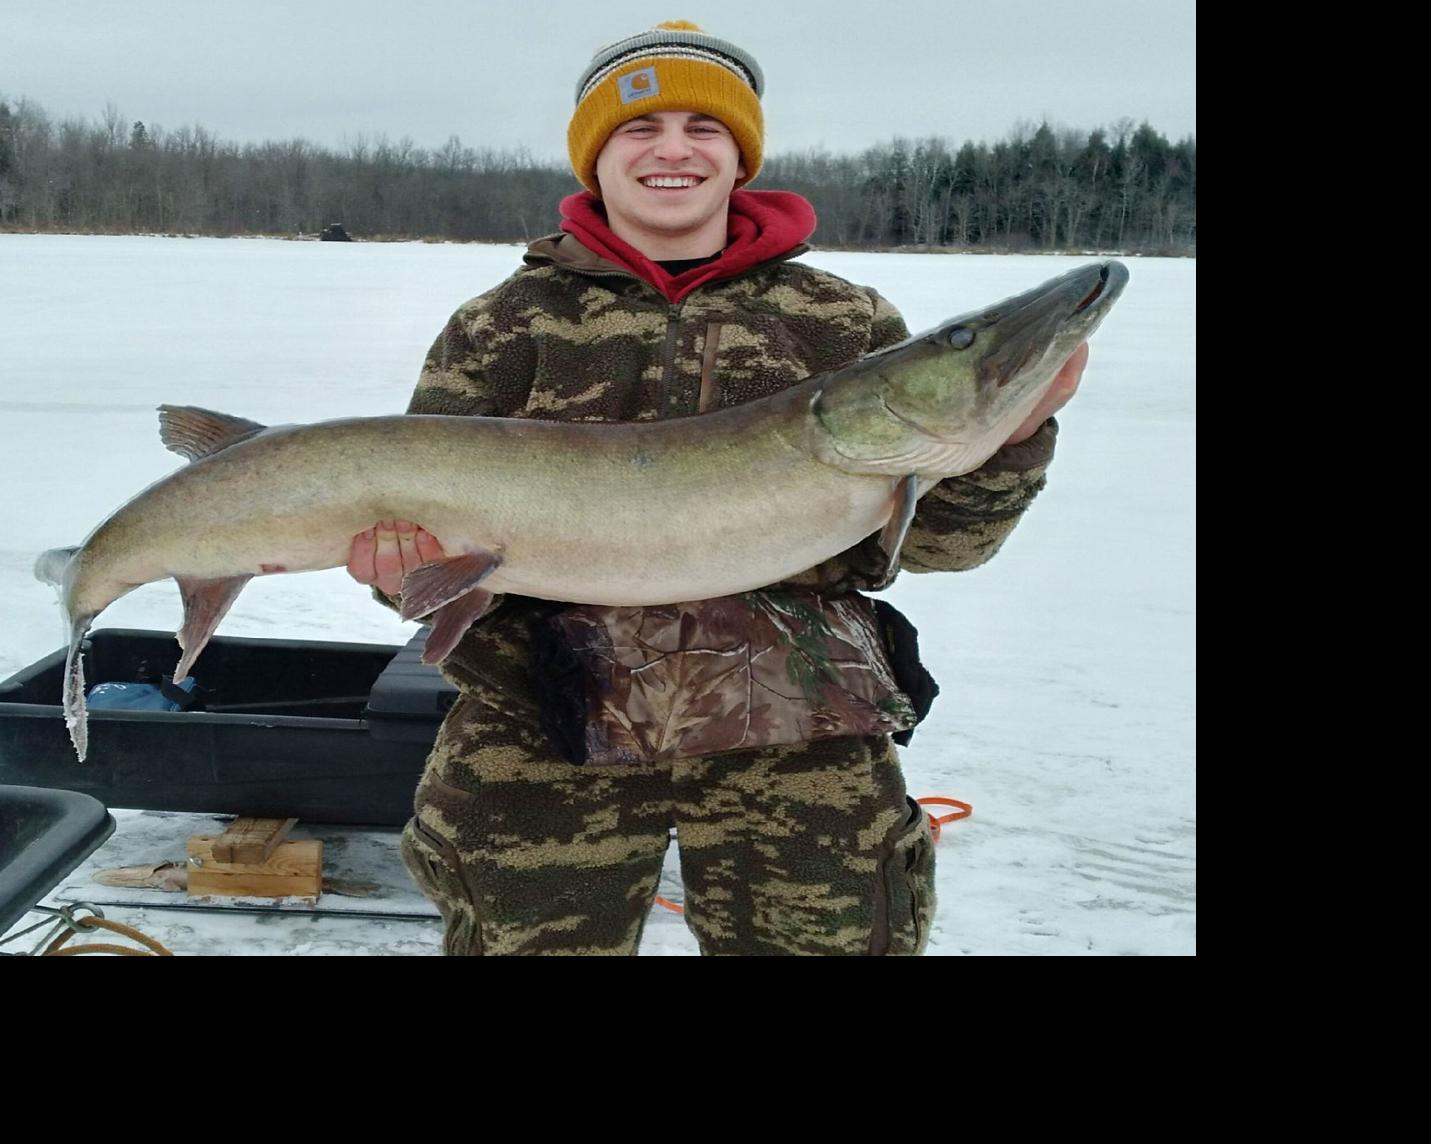 Eau Claire man lands monster muskie while fishing for crappies